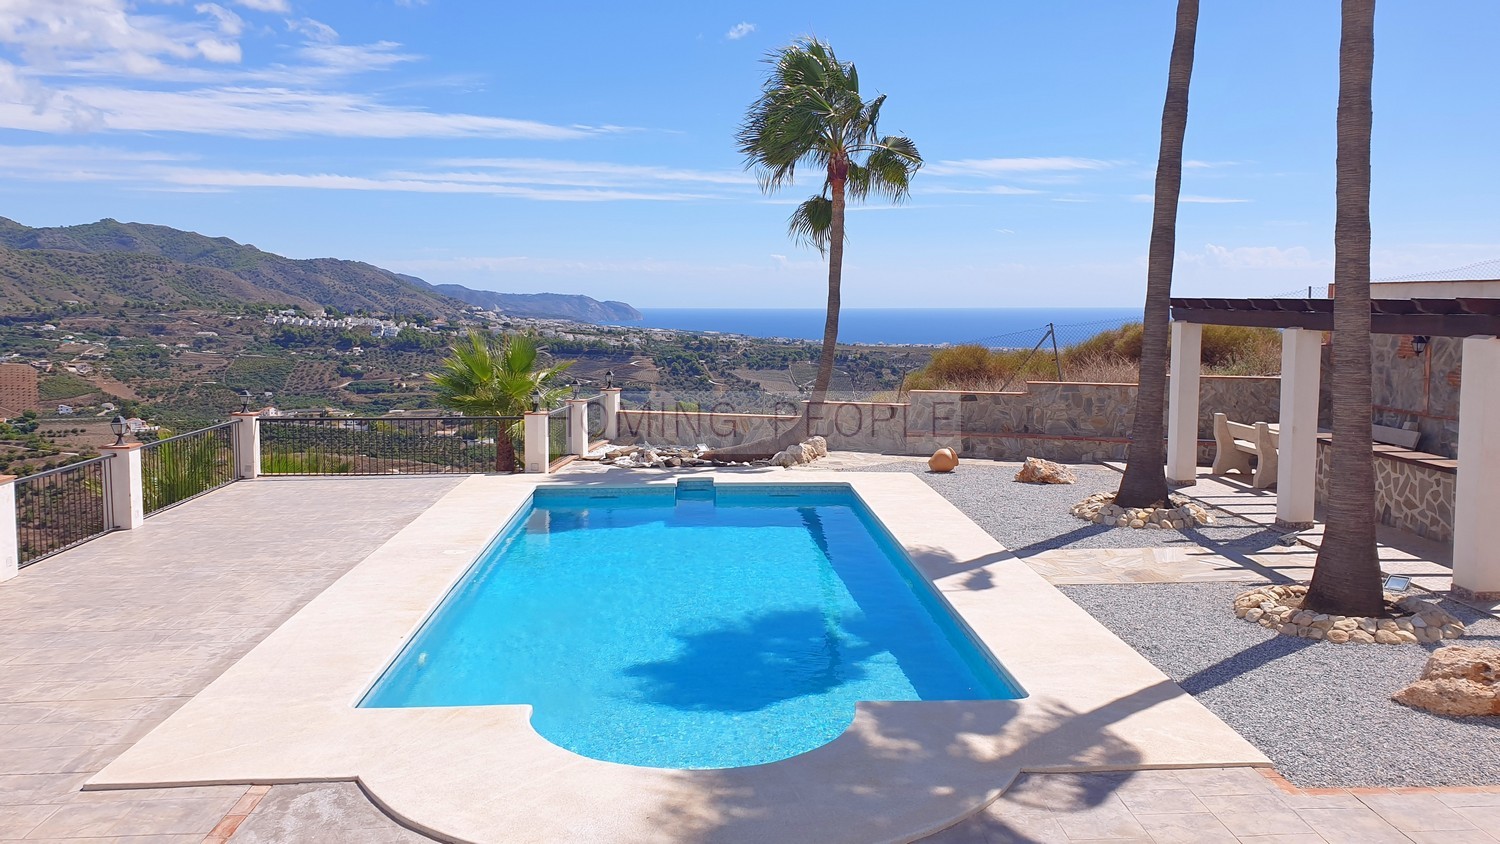 RENTED OUT: Large country villa with pool and sea views